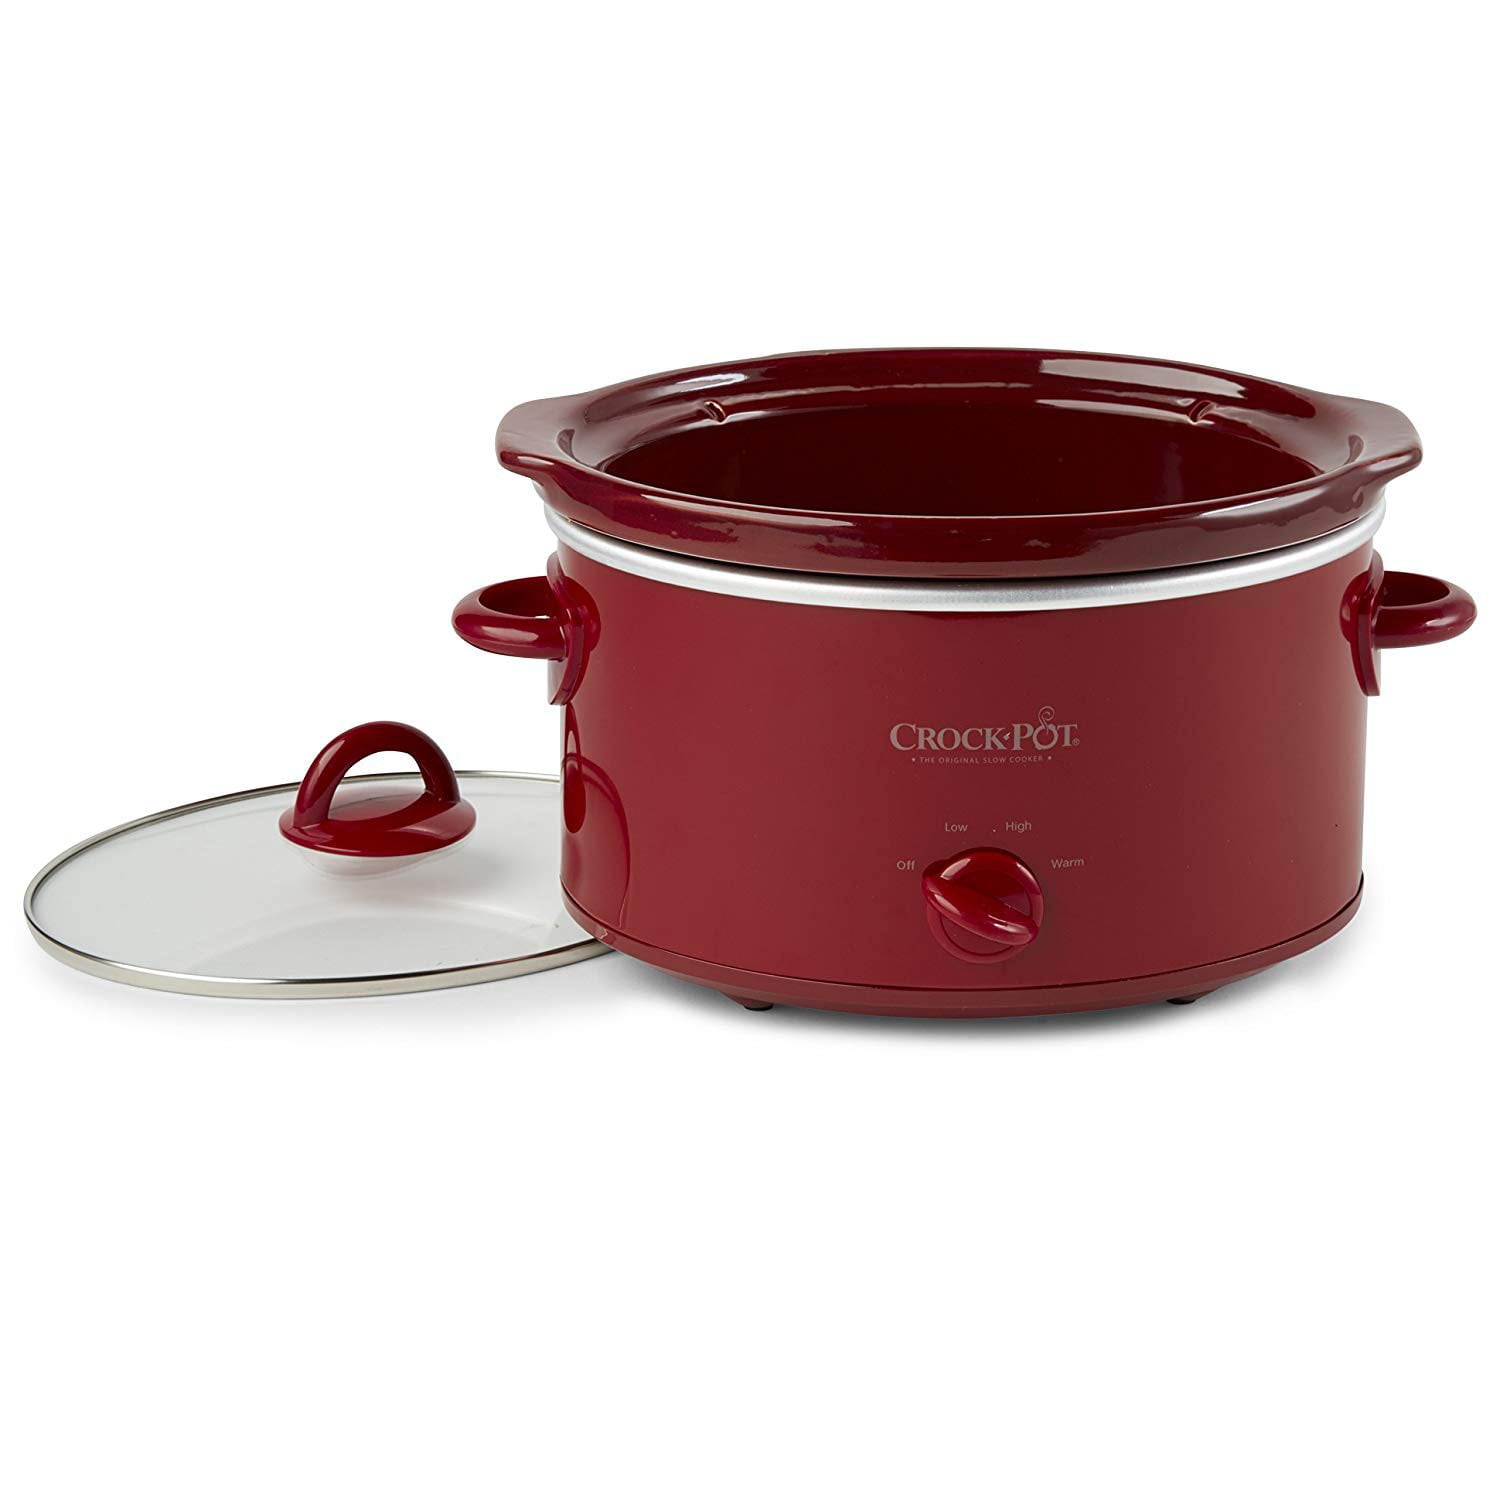 Toastmaster 4-Quart Digital Slow Cooker with Locking Lid (Red)